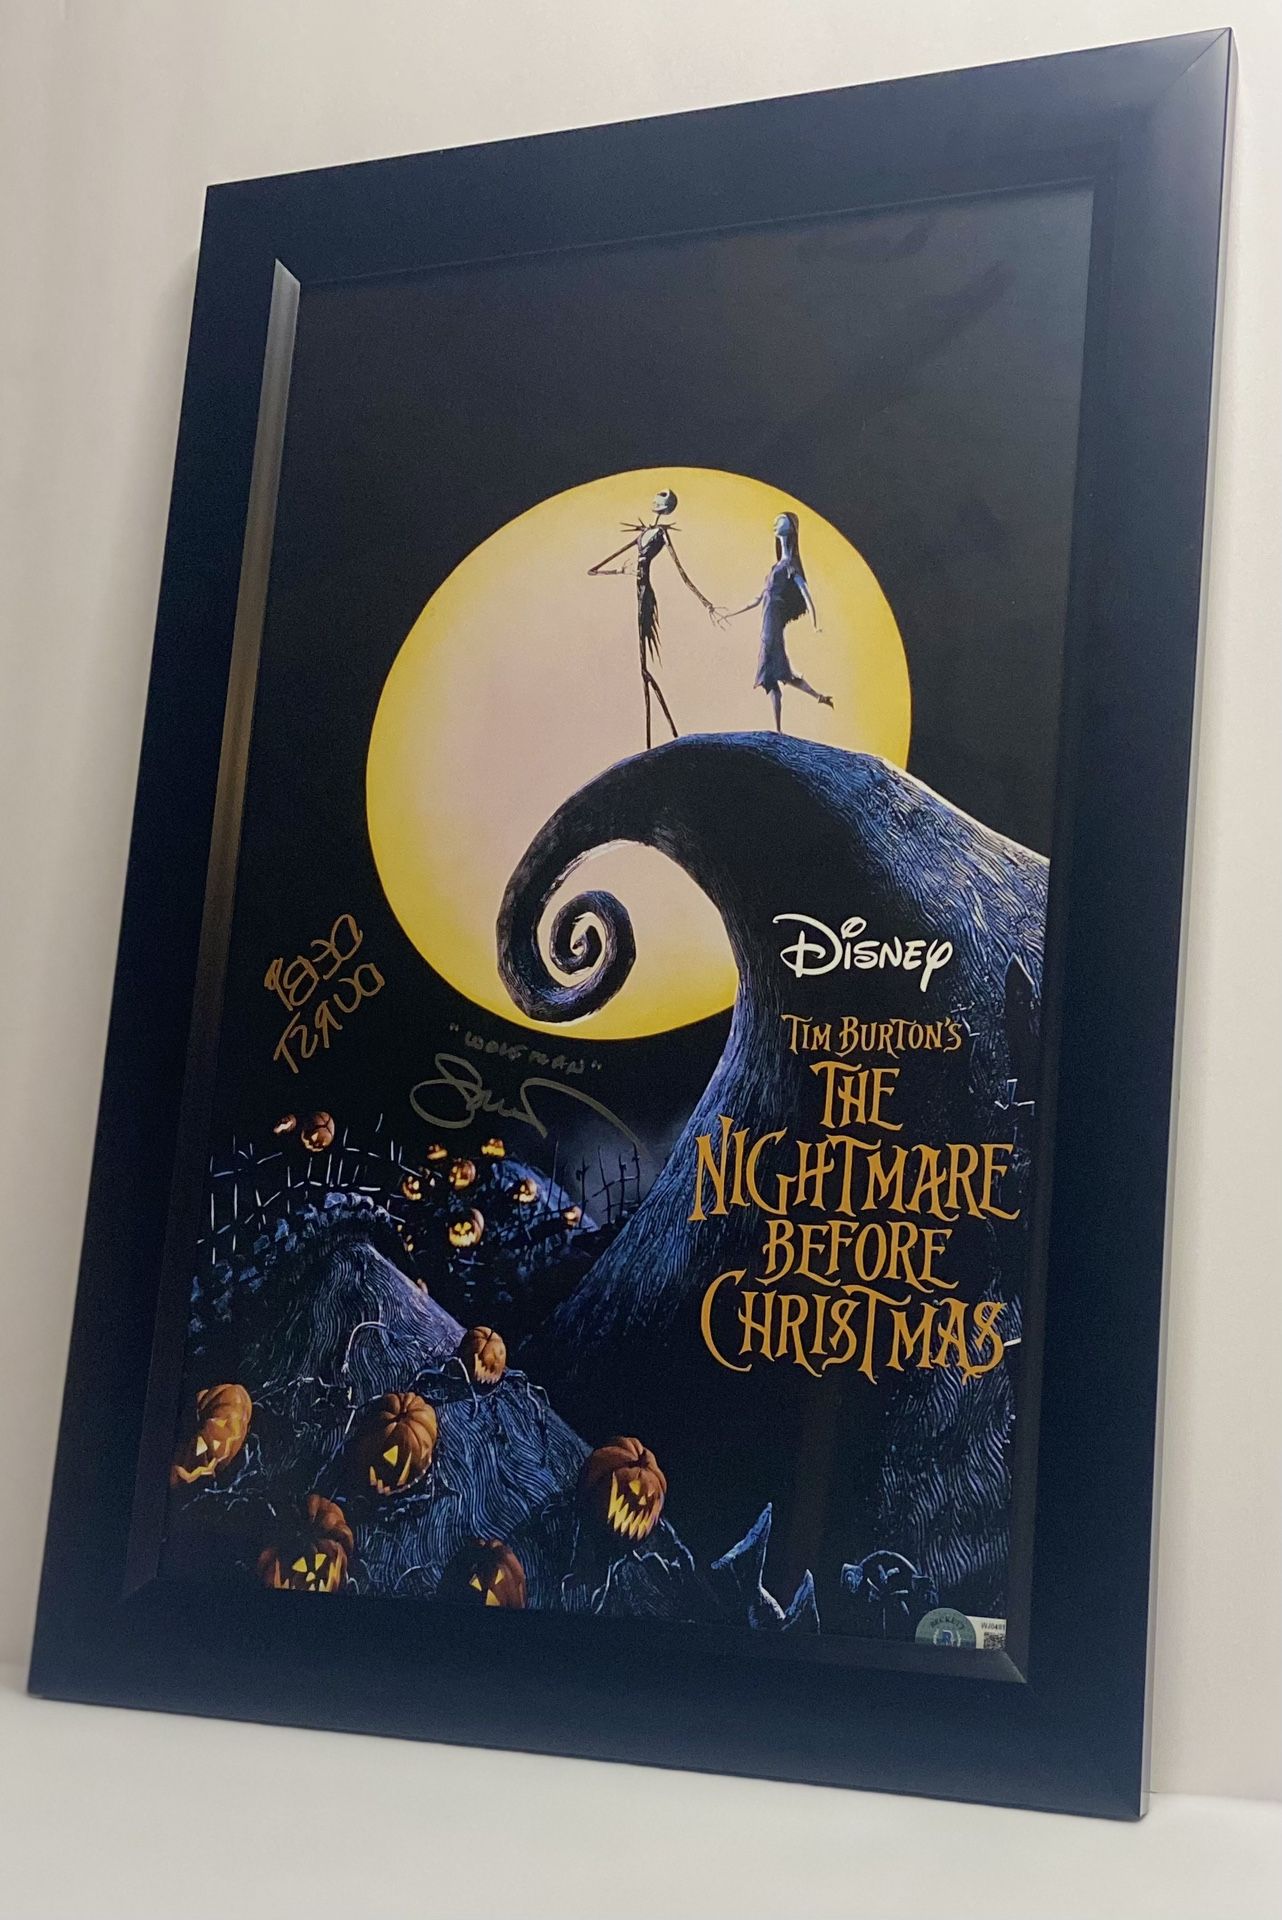 Debi Durst & Glenn Walters Signed "The Nightmare Before Christmas" 11x17 Photo Inscribed "Wolfman" (Auth. By Beckett)